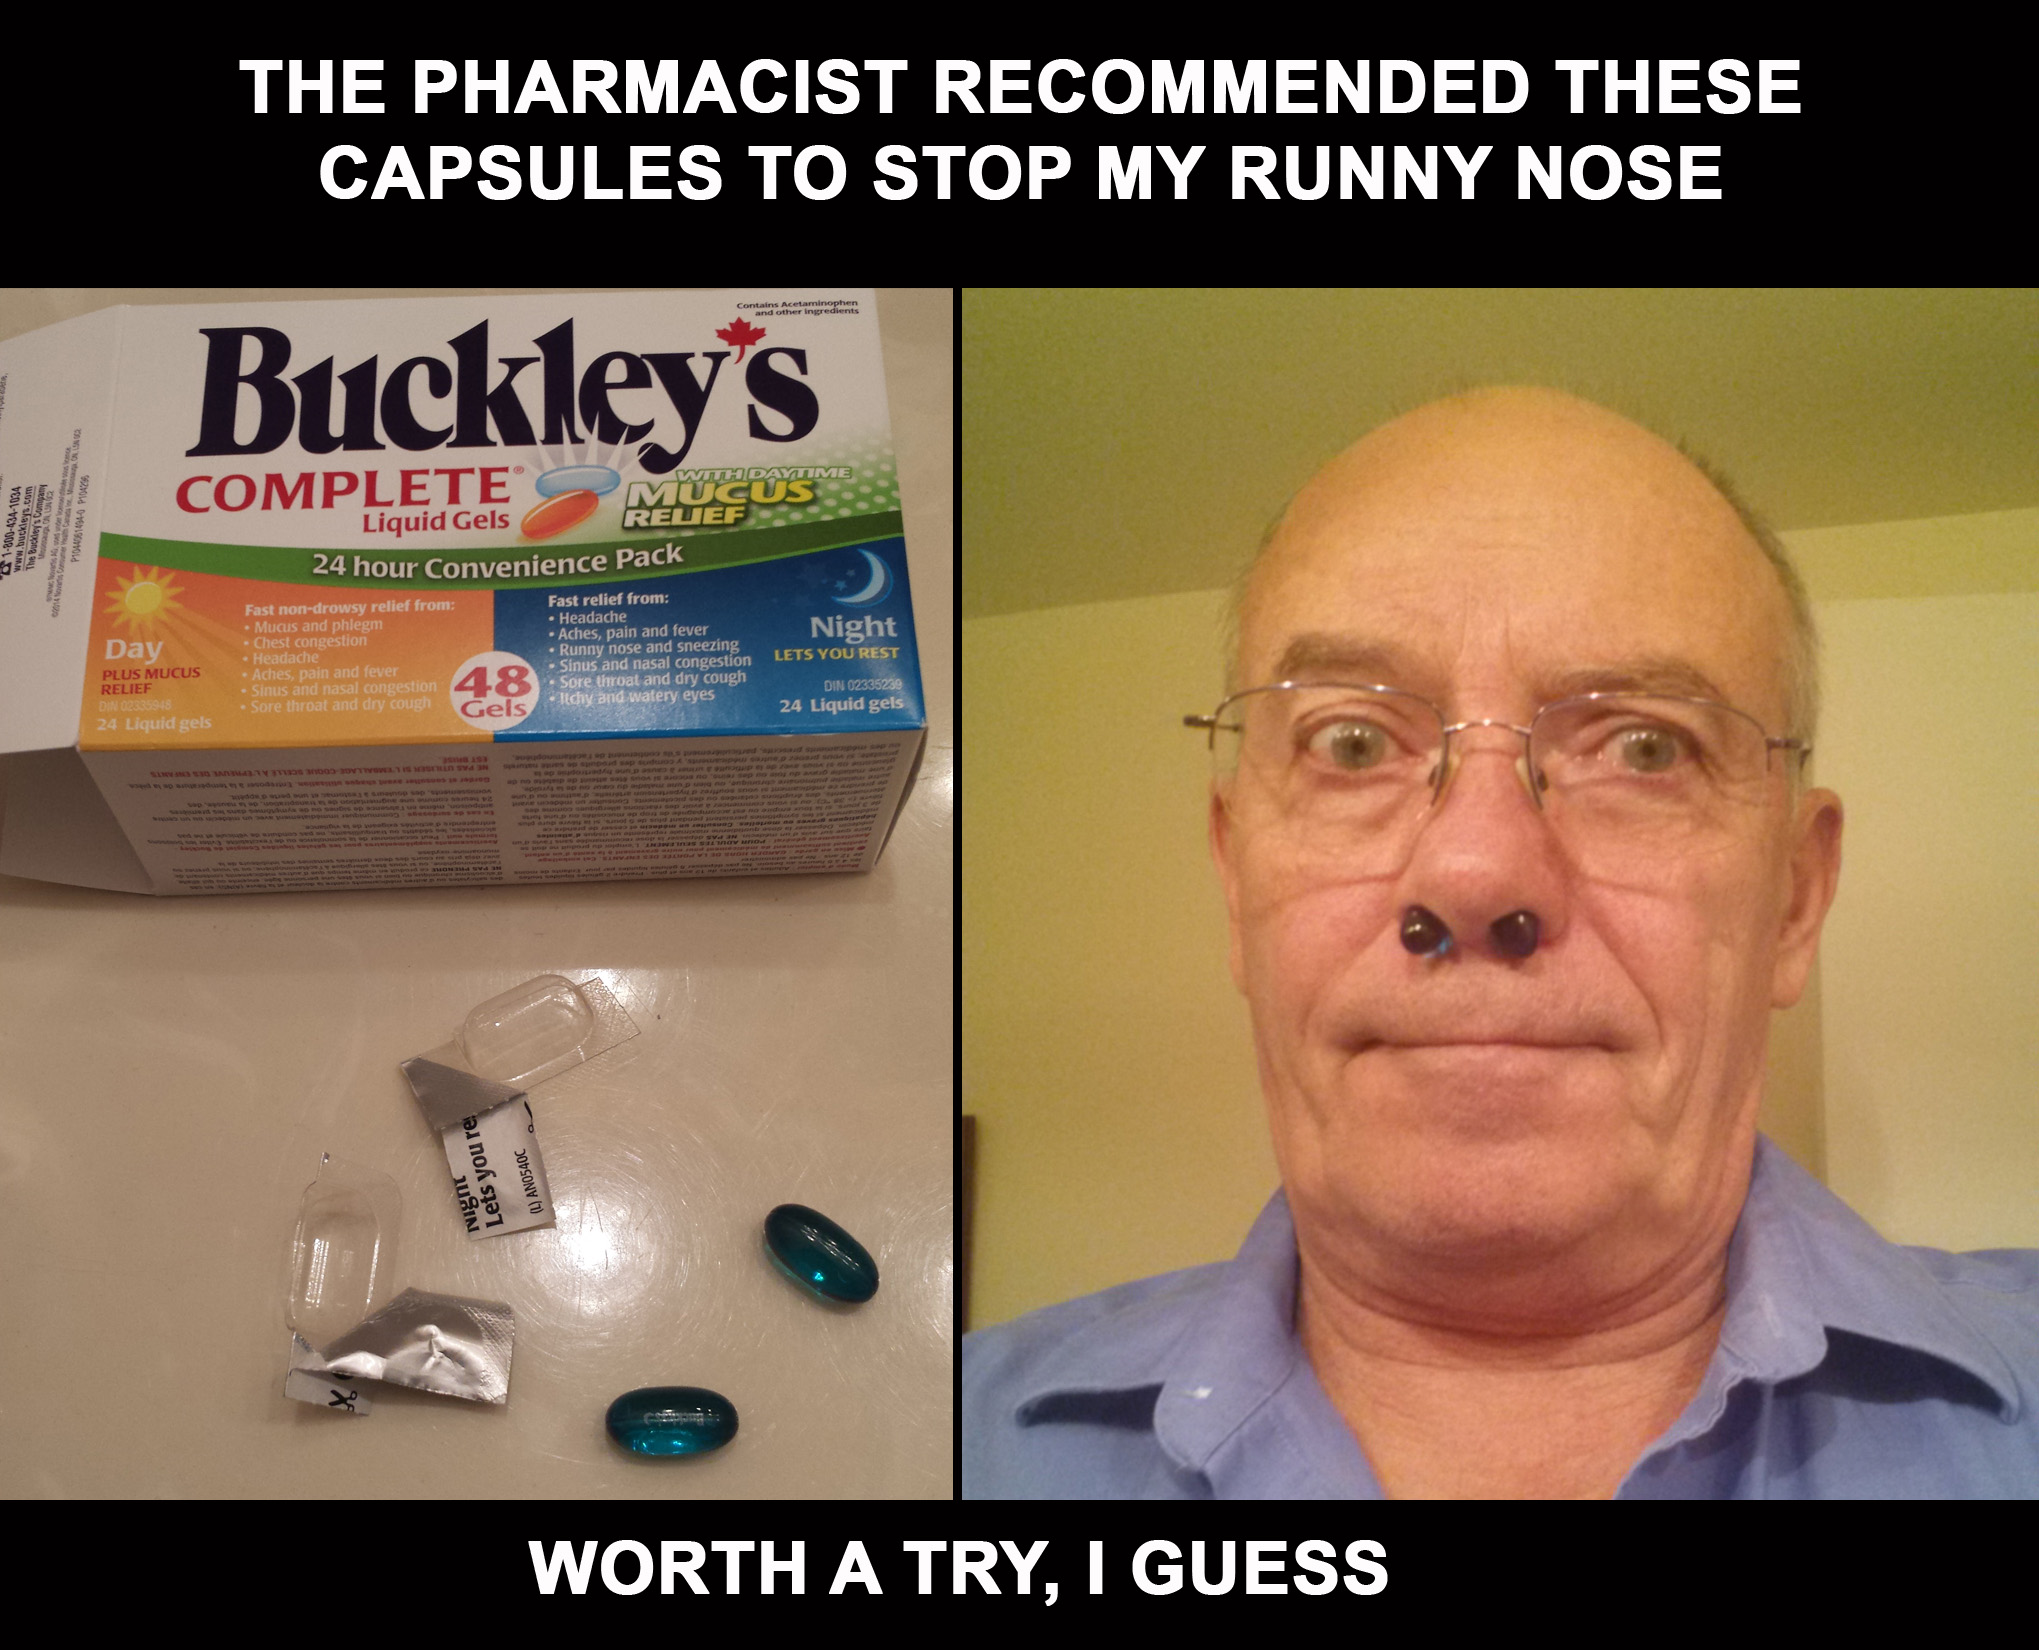 runny nose memes - The Pharmacist Recommended These Capsules To Stop My Runny Nose Buckleys Liquid Gels 24 hour convenience Pack Nicht Worth A Try, I Guess